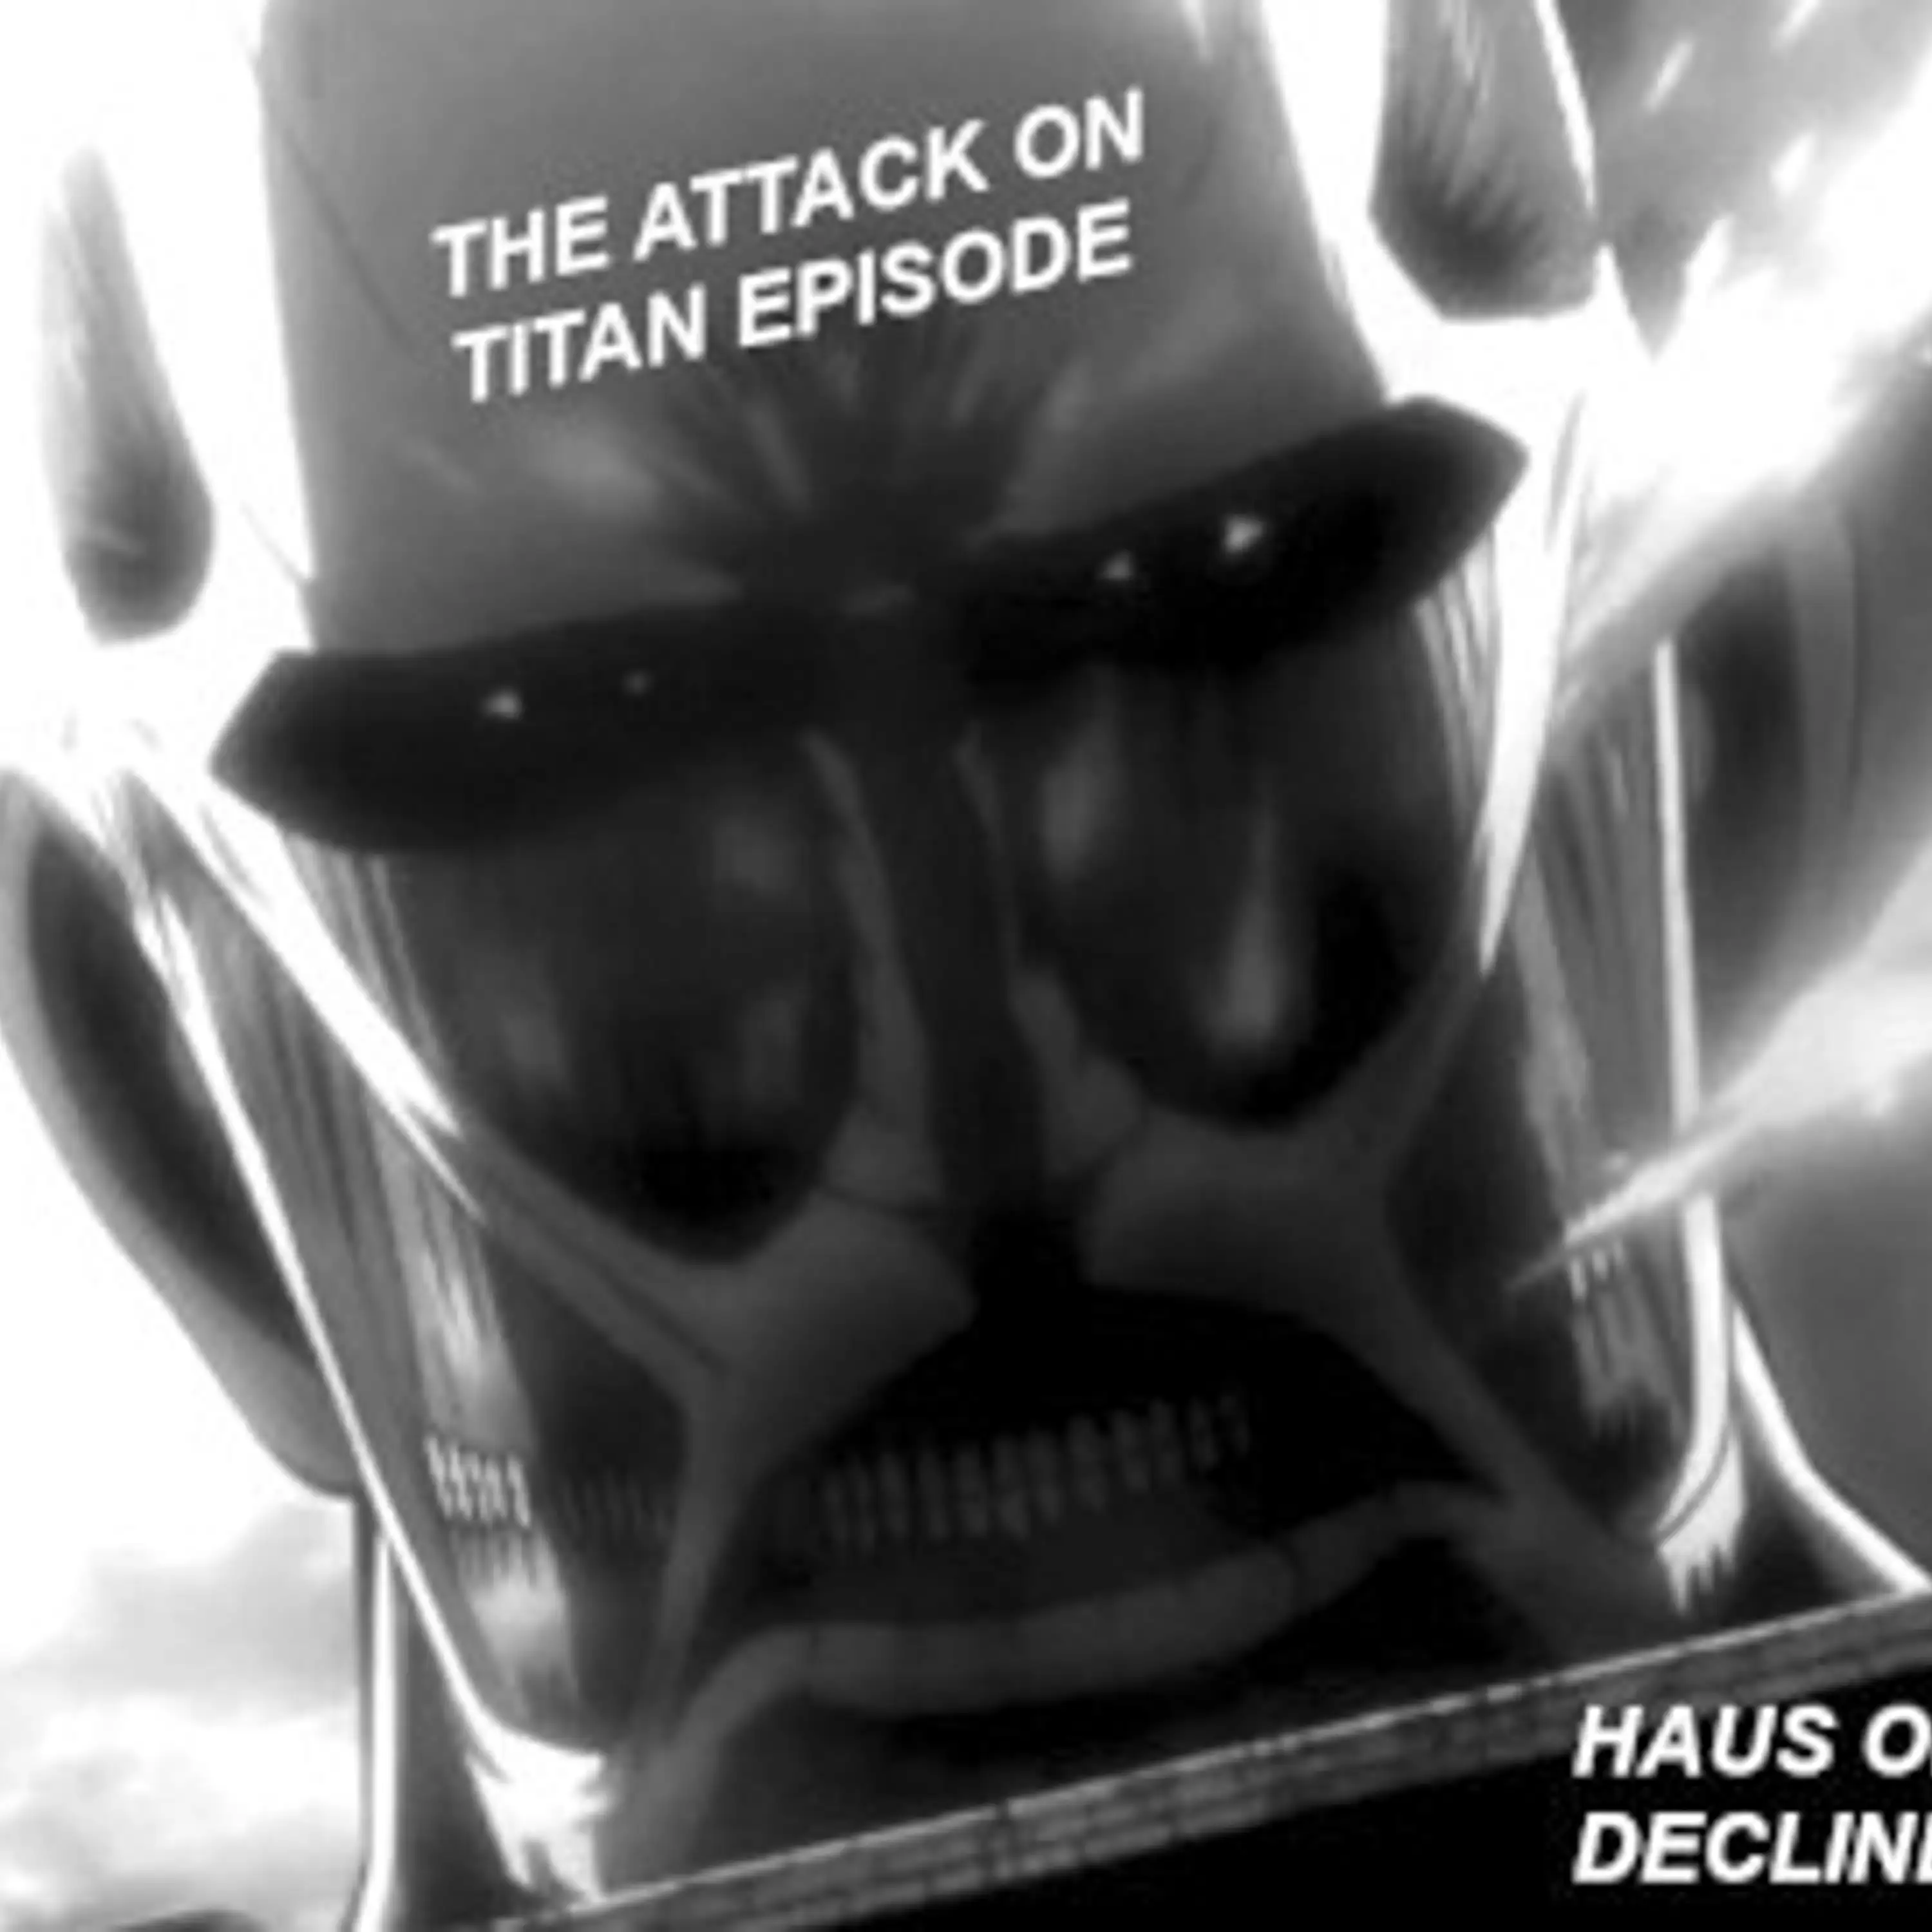 The Attack on Titan Episode with Lux and Griffin!